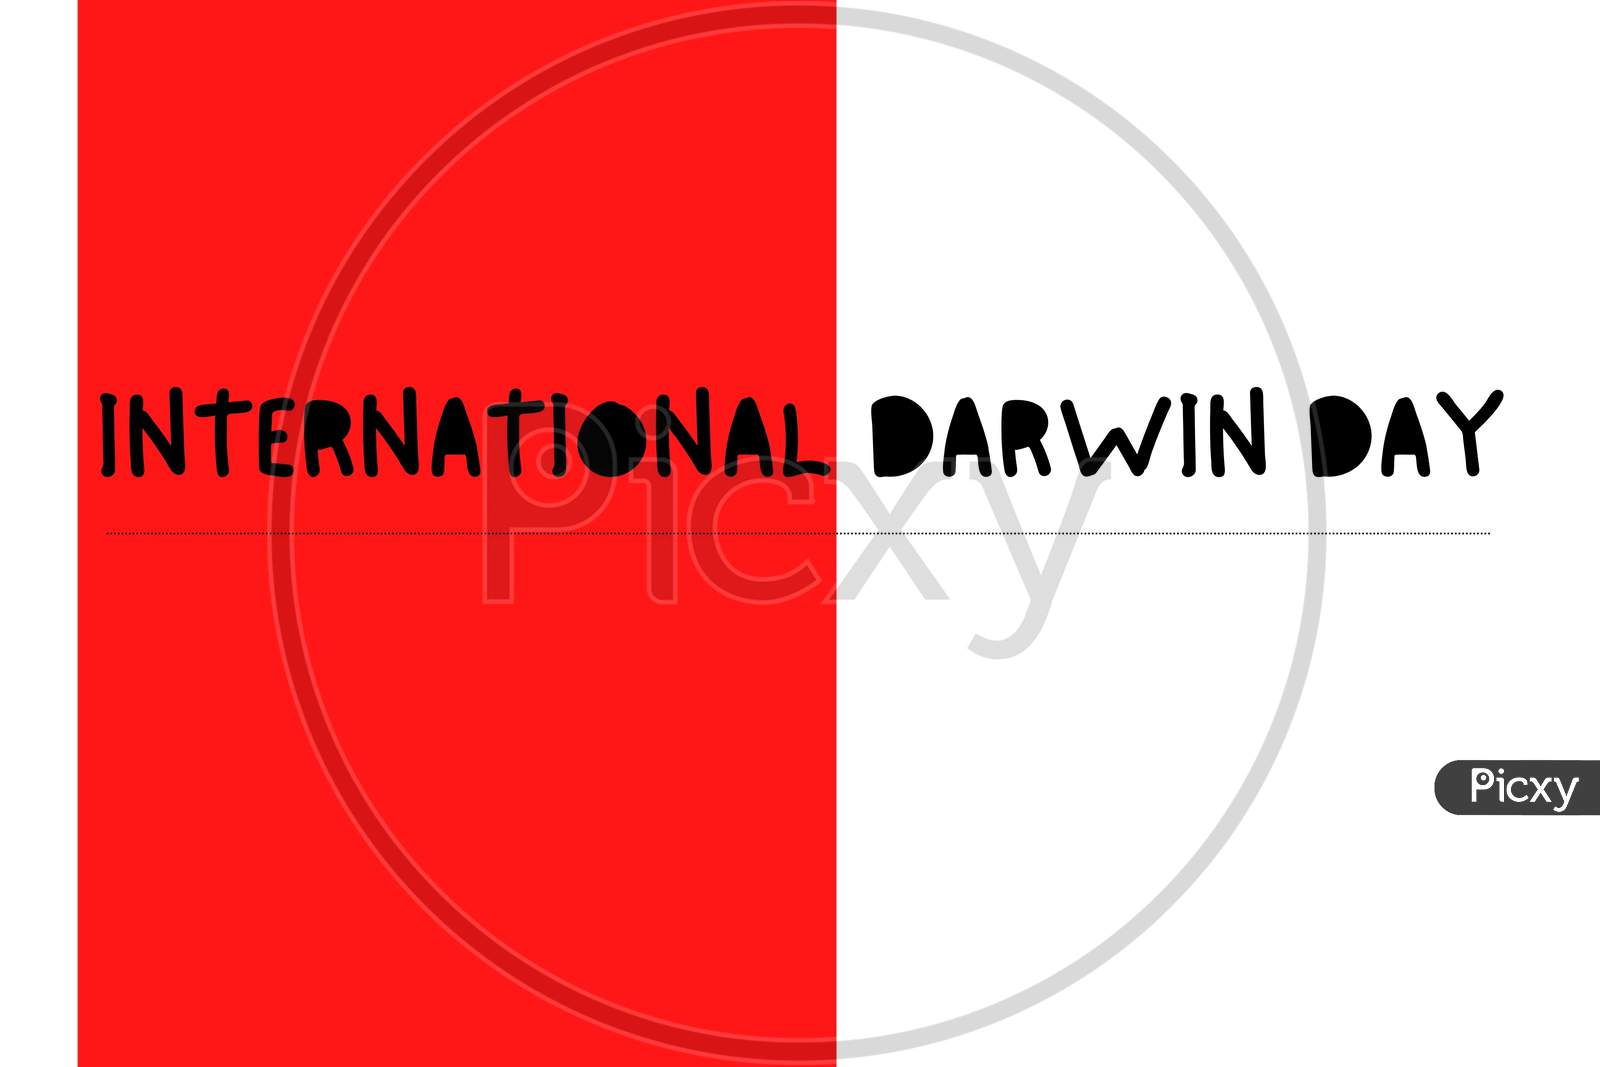 International Darwin Day On February 12. Text With Red And White Background